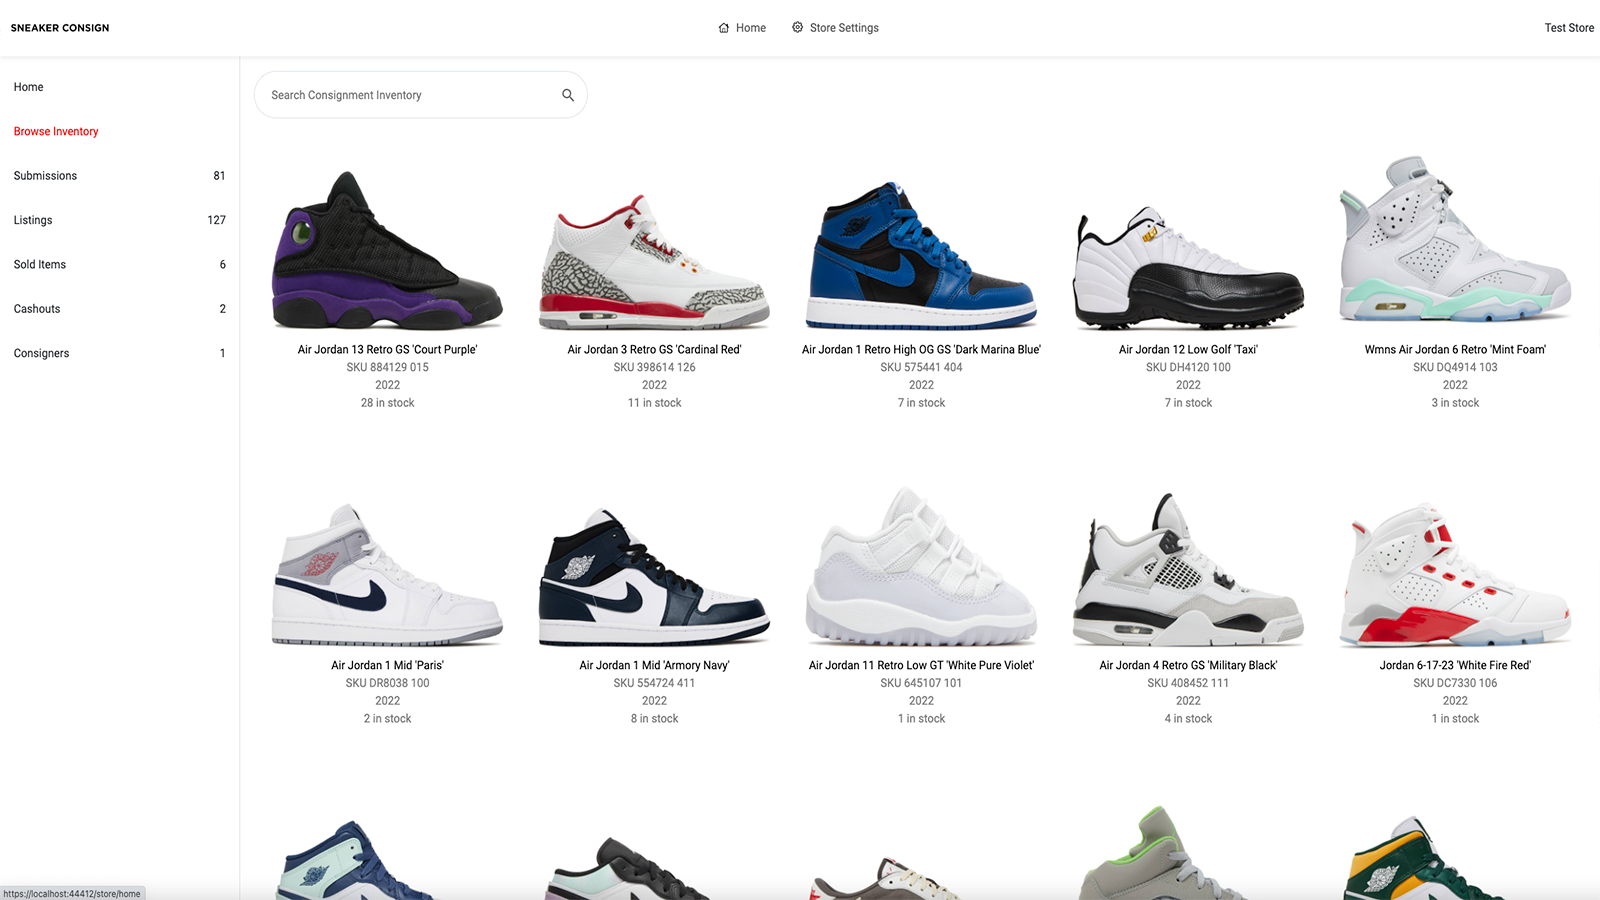 Shopify items synced on Sneaker Consign portal